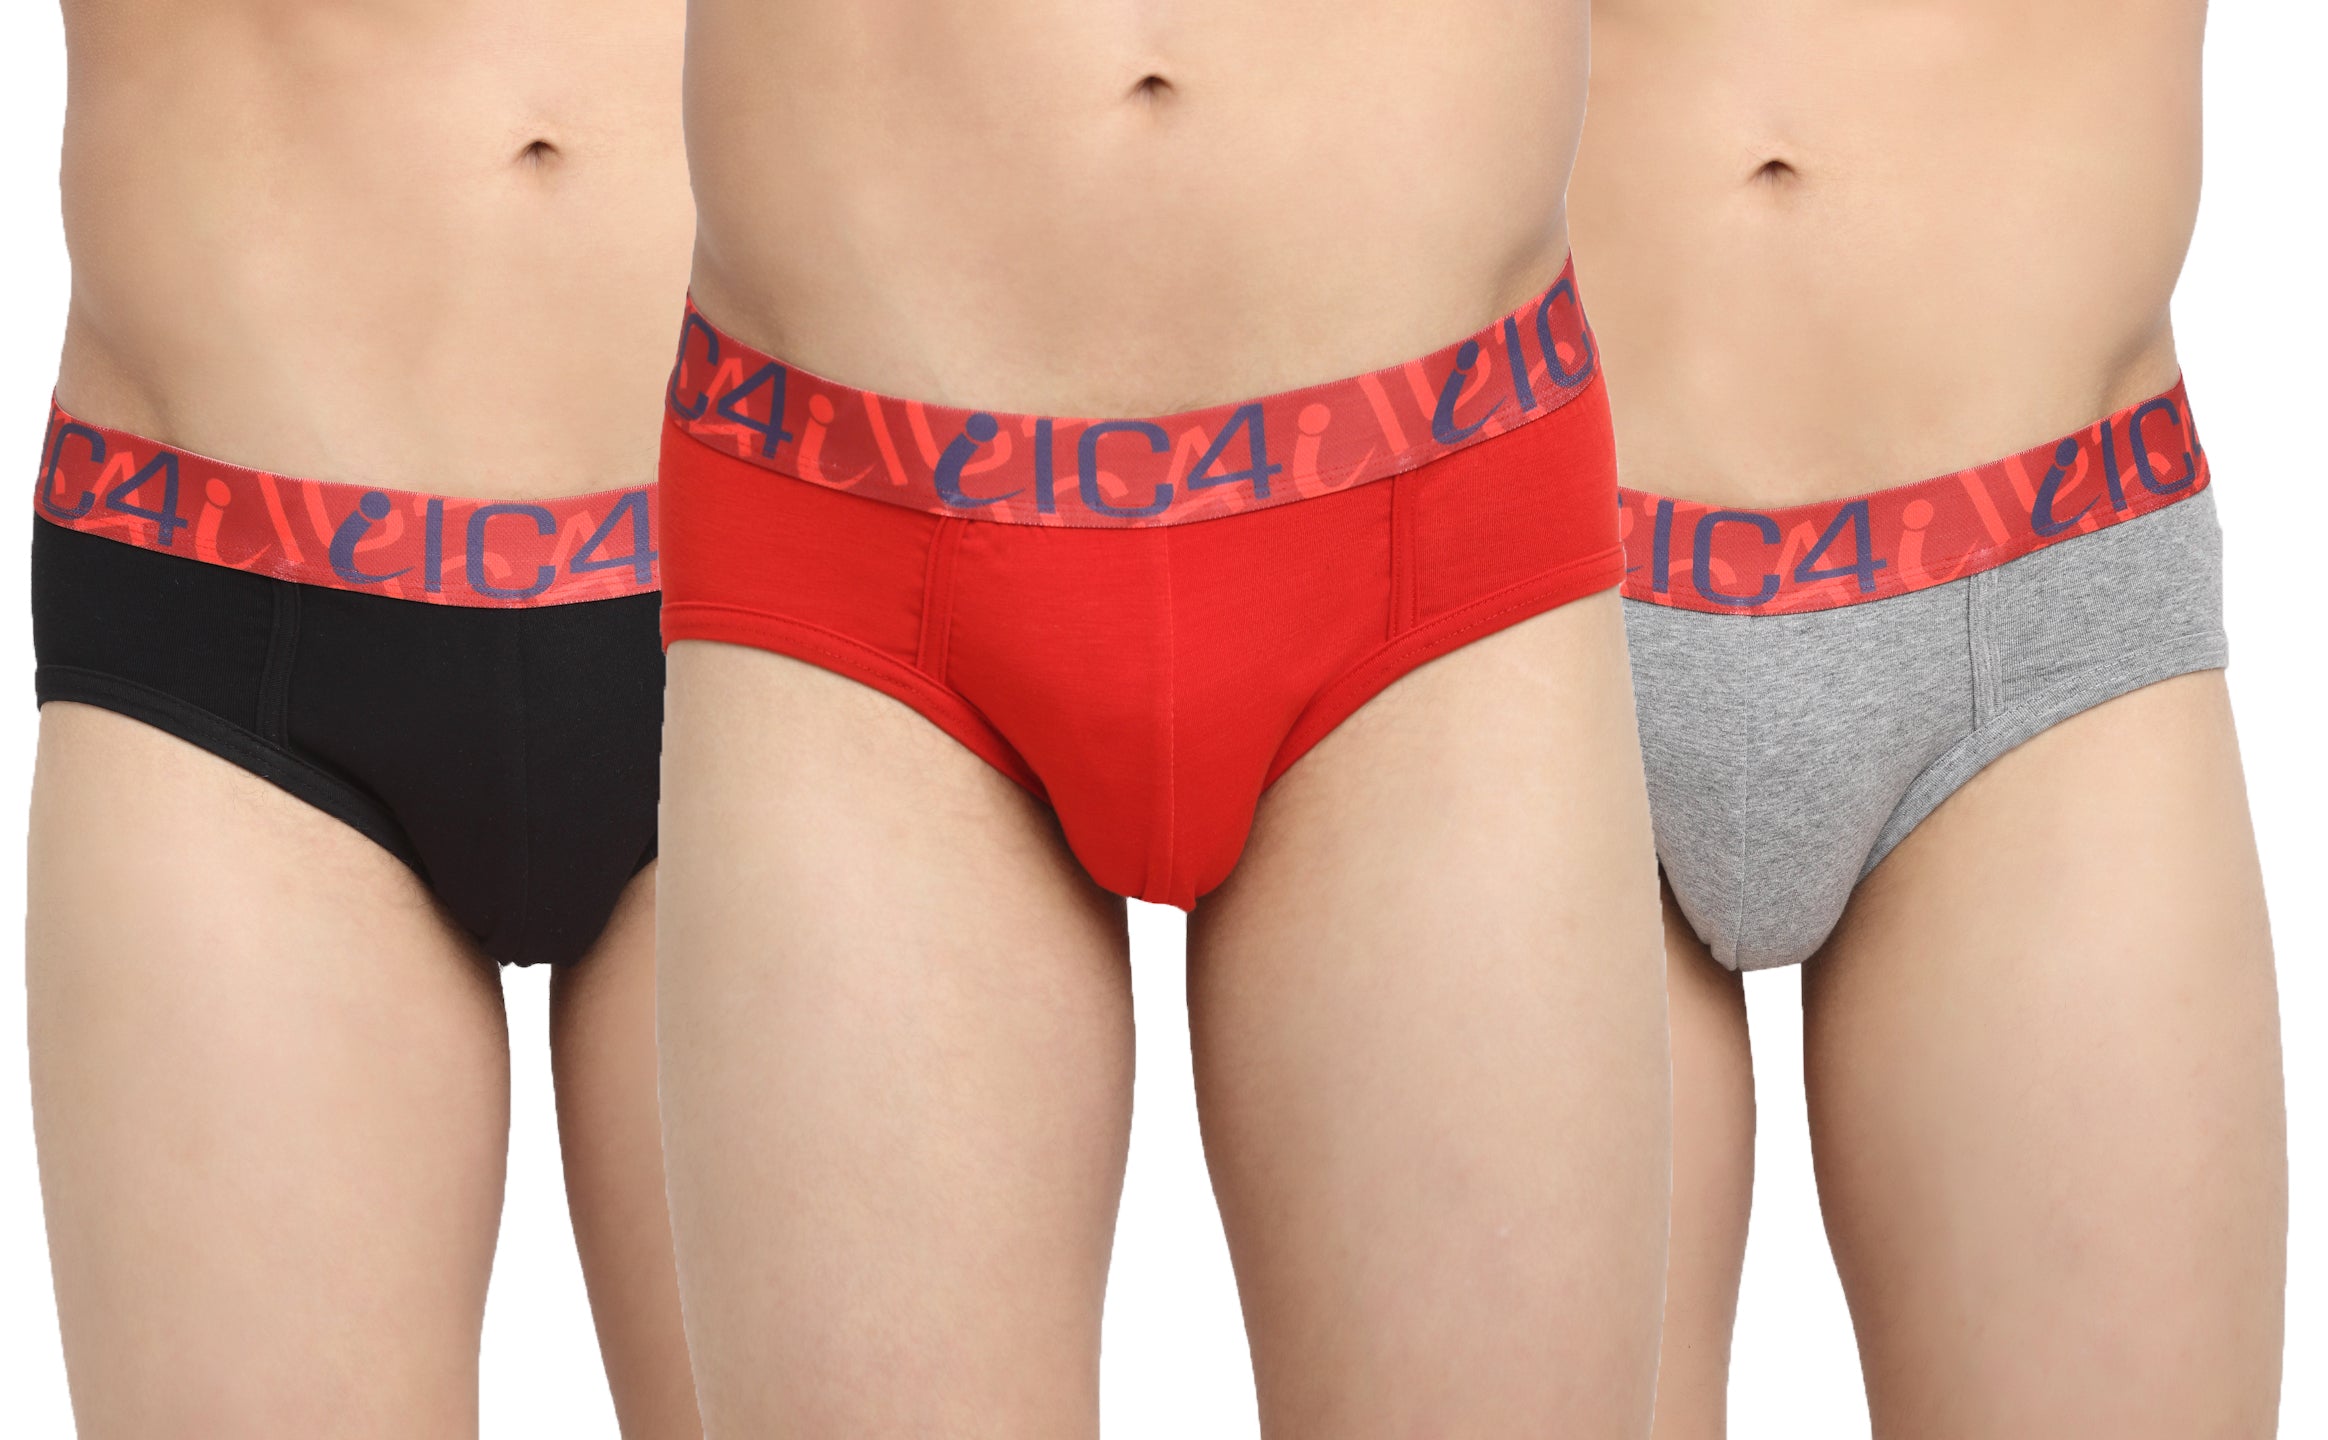 IC4 Men's Fashion Brief Combo Pack of 3